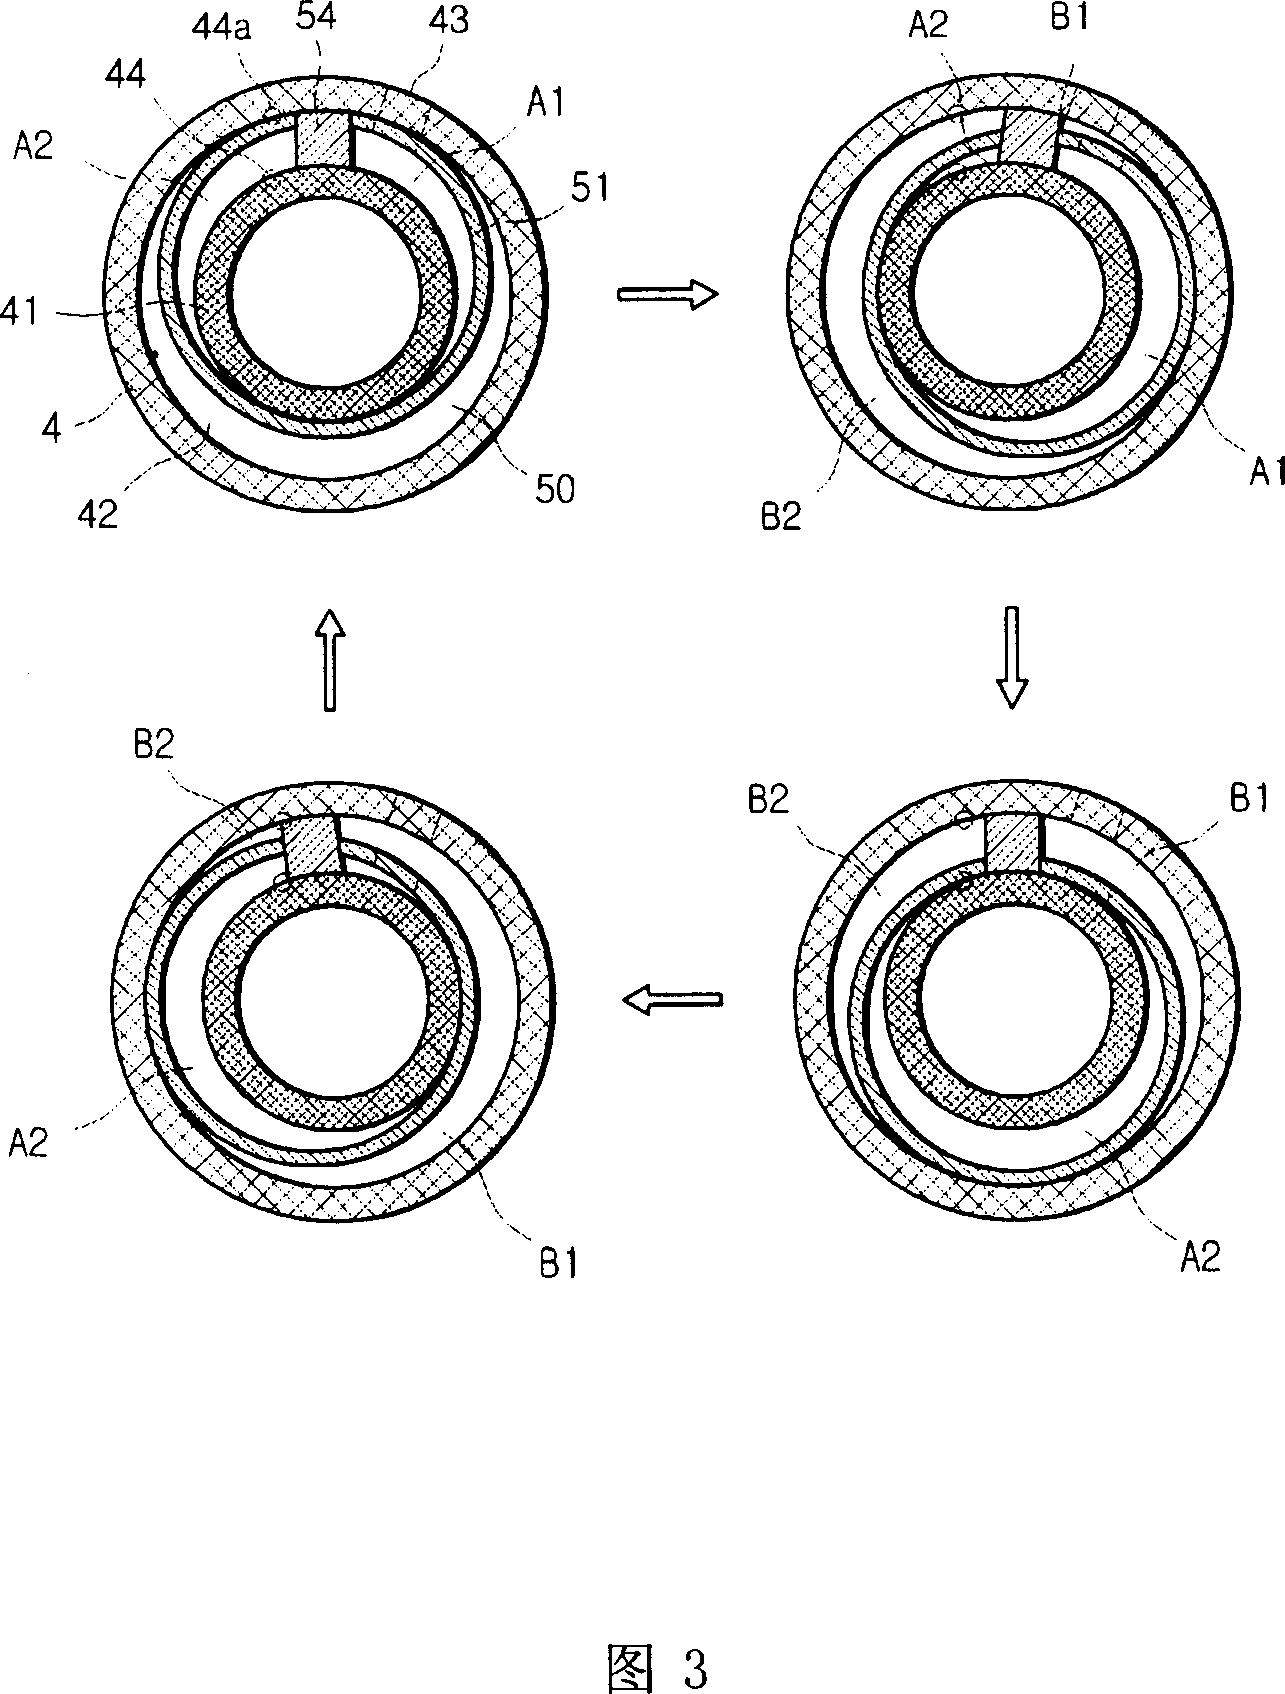 Volume varying device for rotating blade type compressor